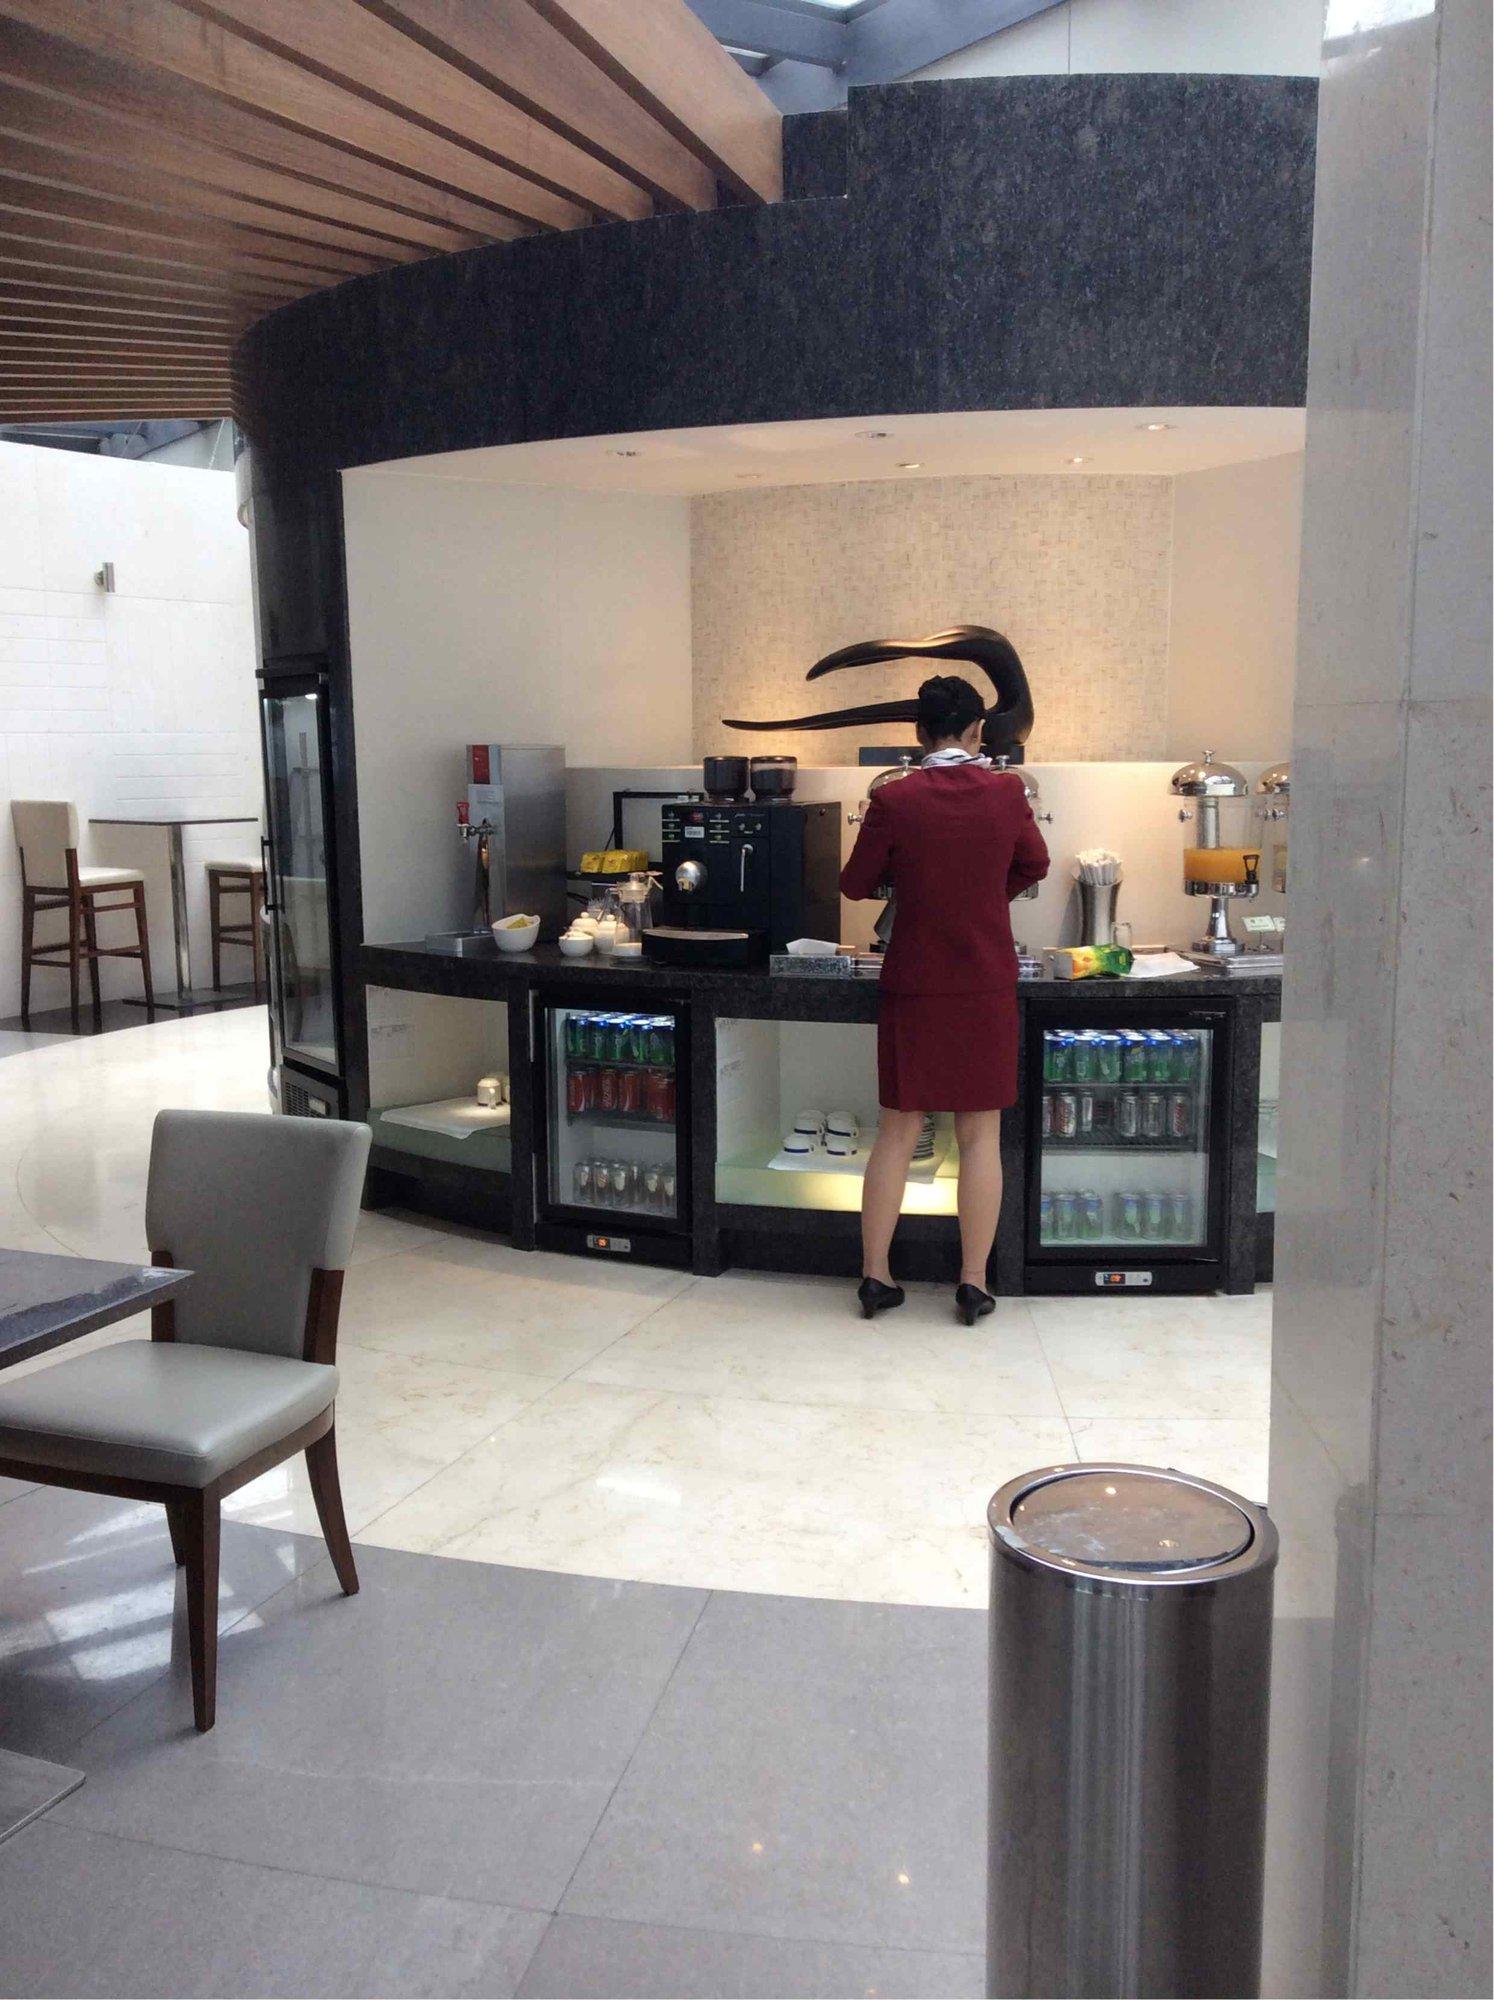 V8 Air China First & Business Class Lounge image 4 of 9